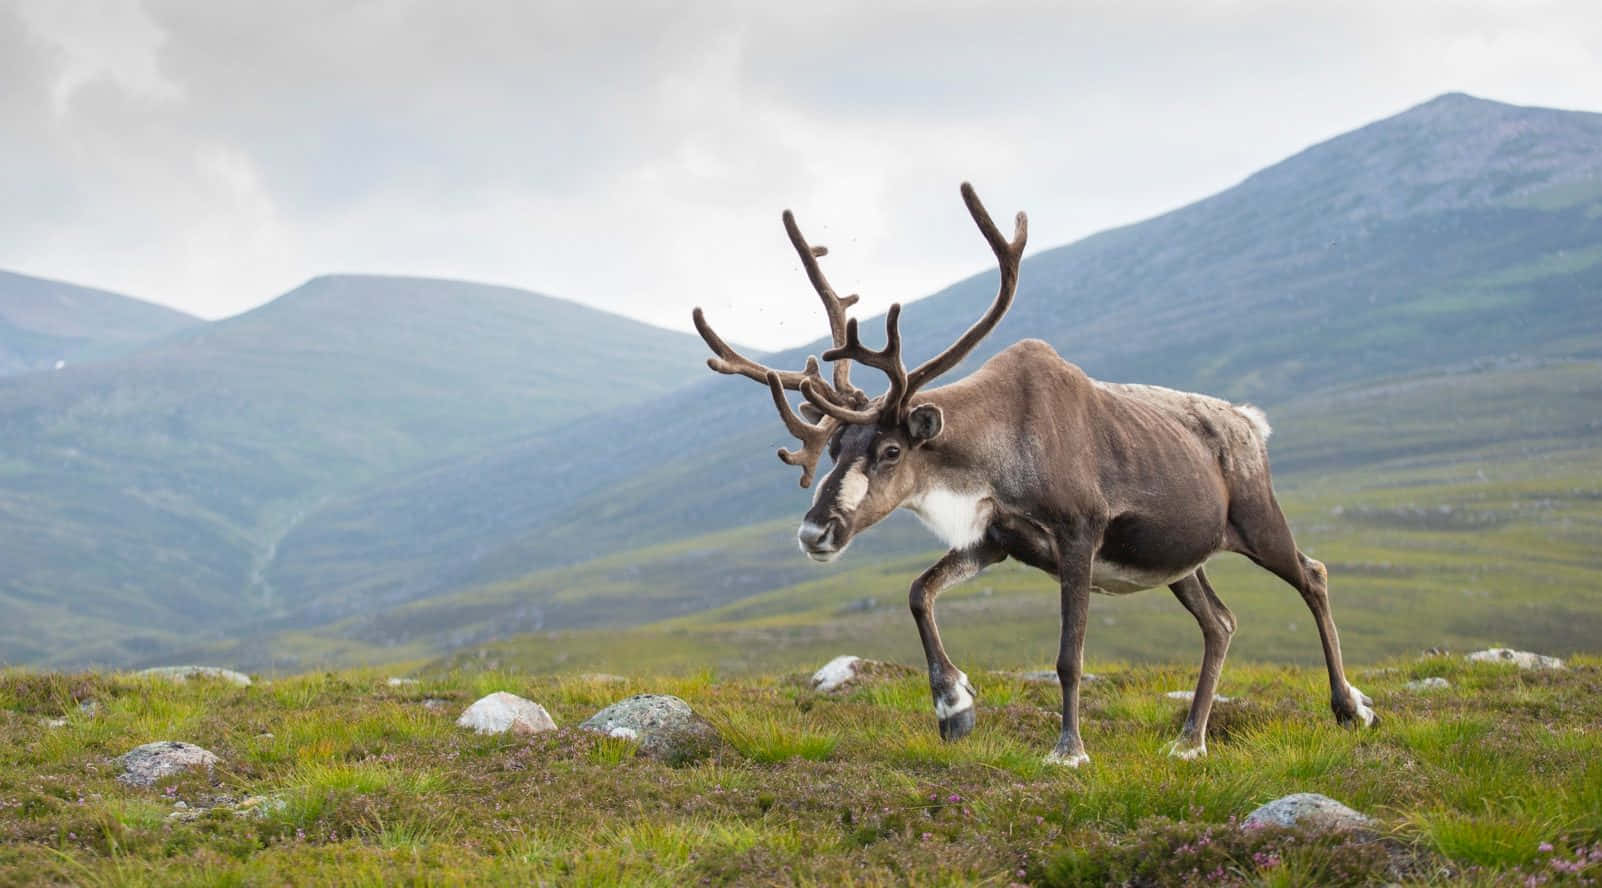 Reindeer in Winter Looking Towards a Snow-Capped Mountain